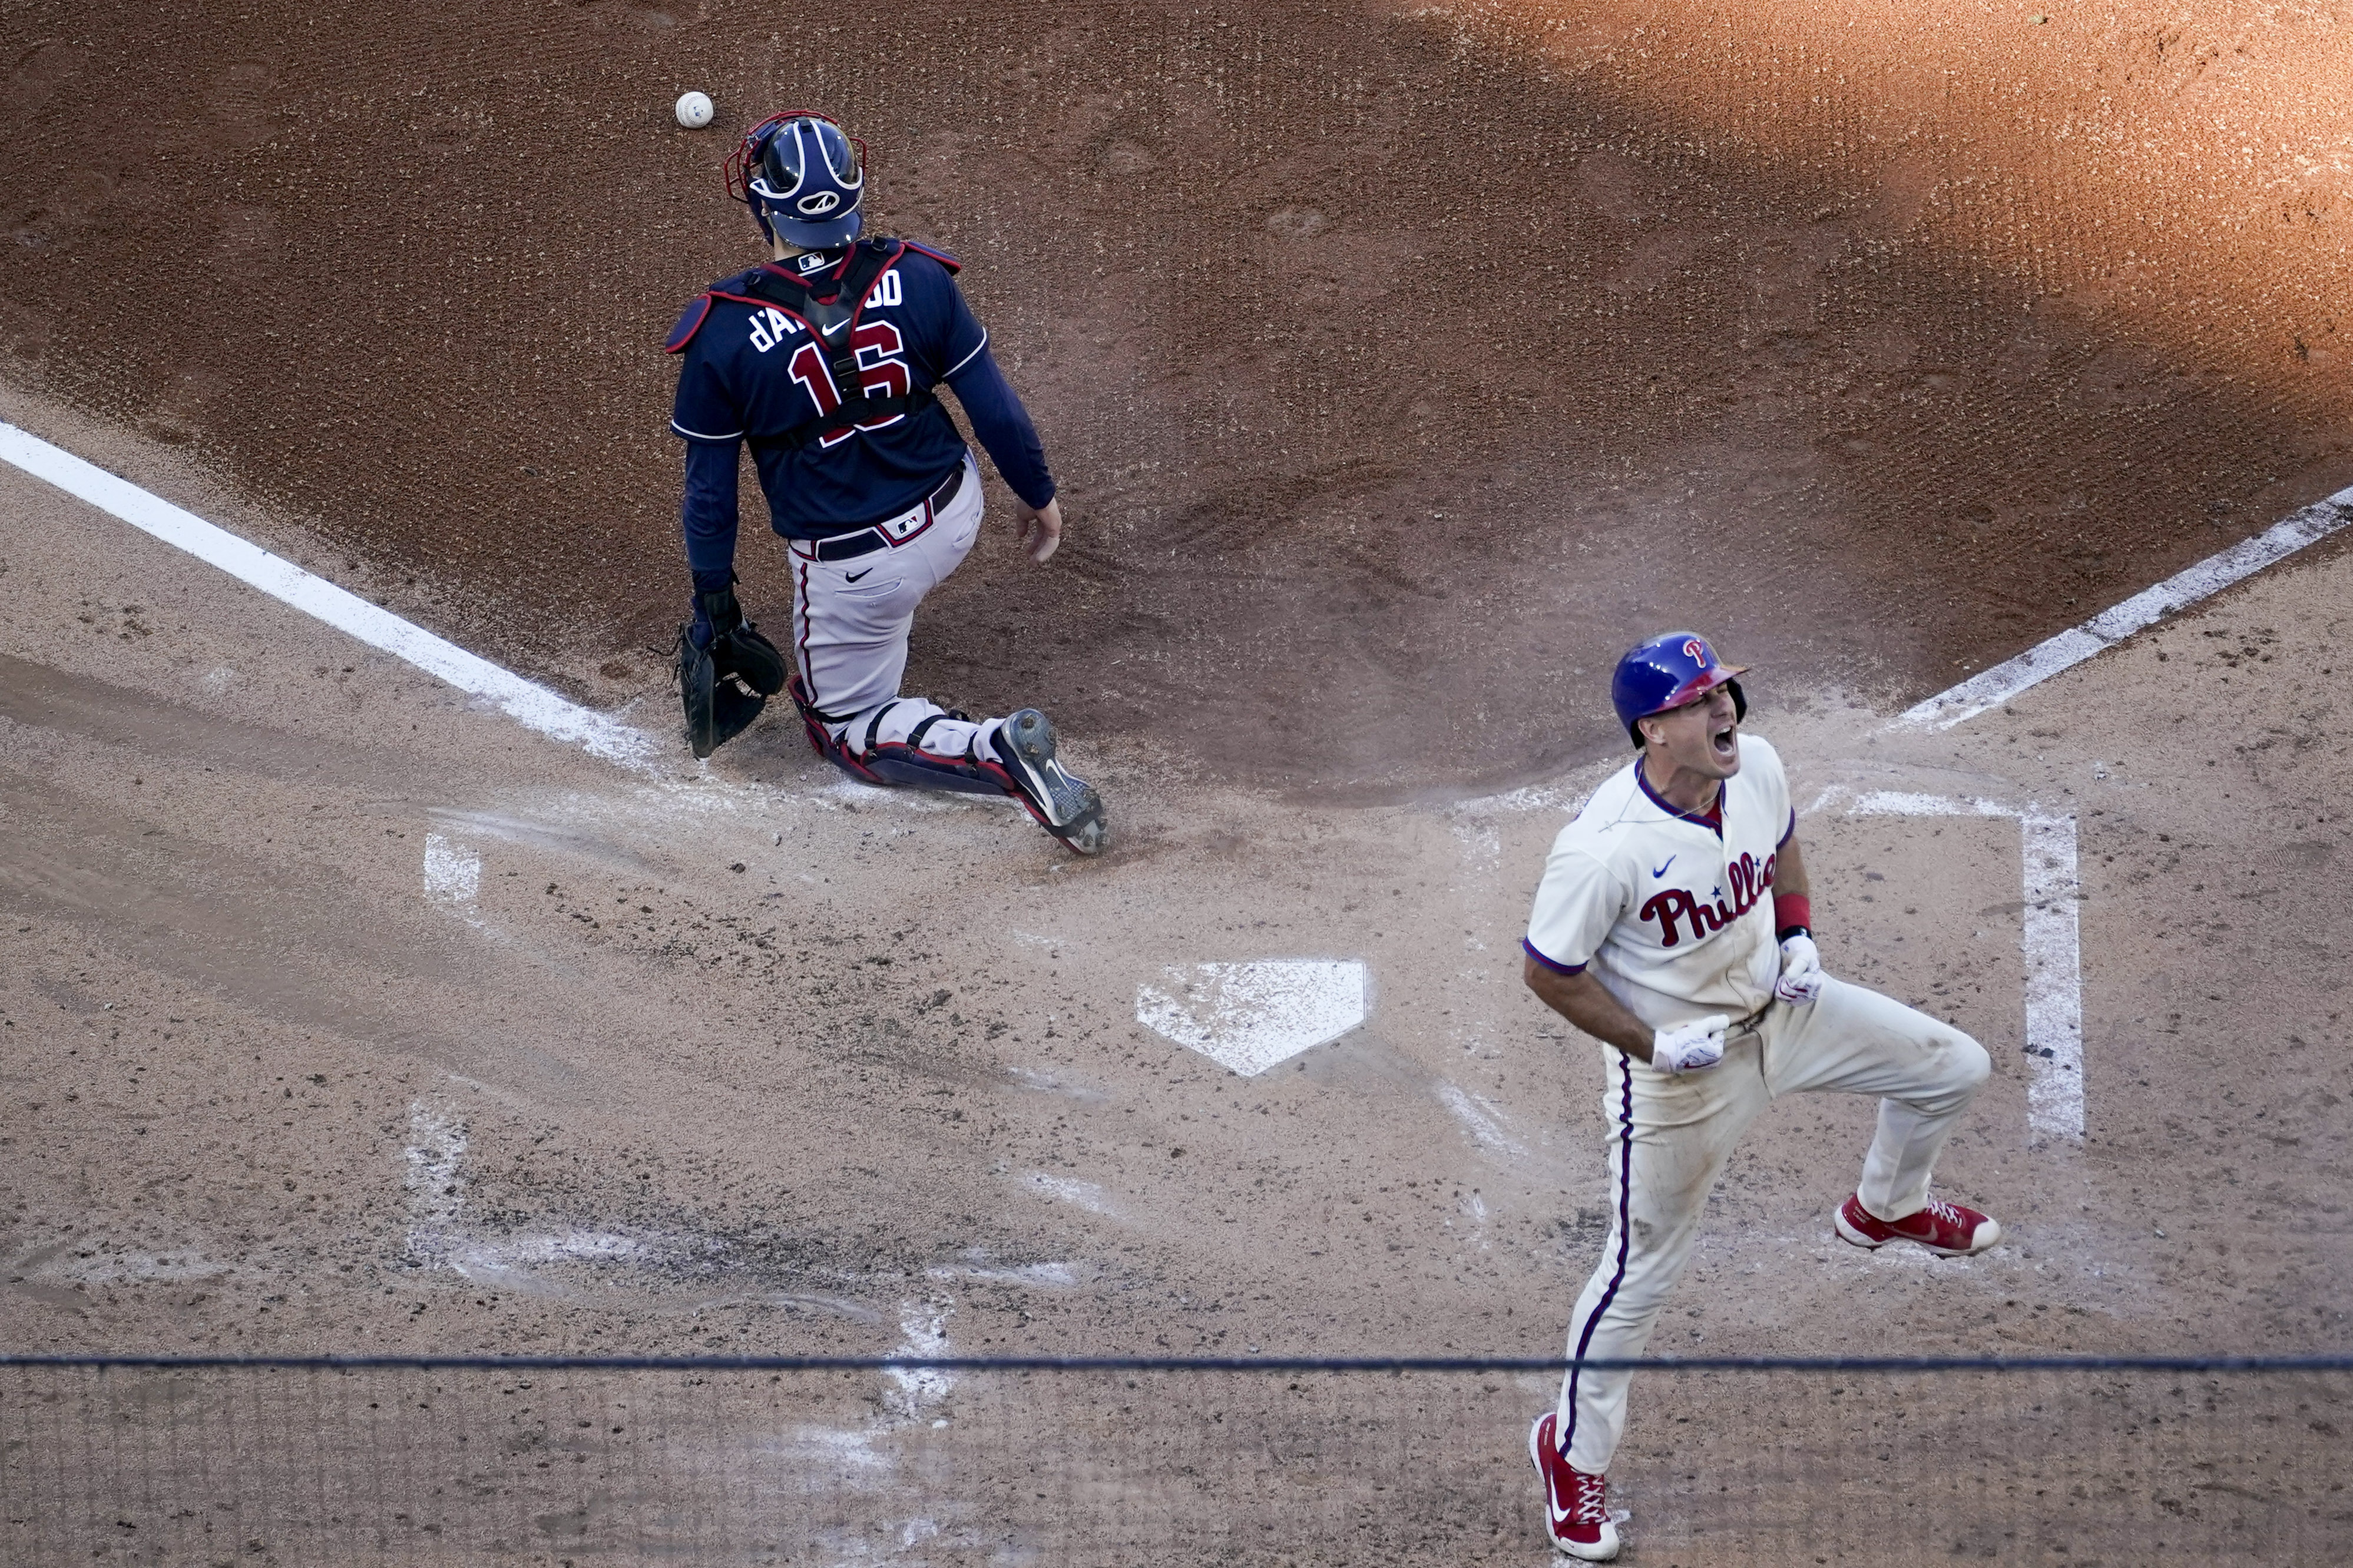 Marsh Madness! Phillies beat Braves 8-3 in Game 4, into NLCS